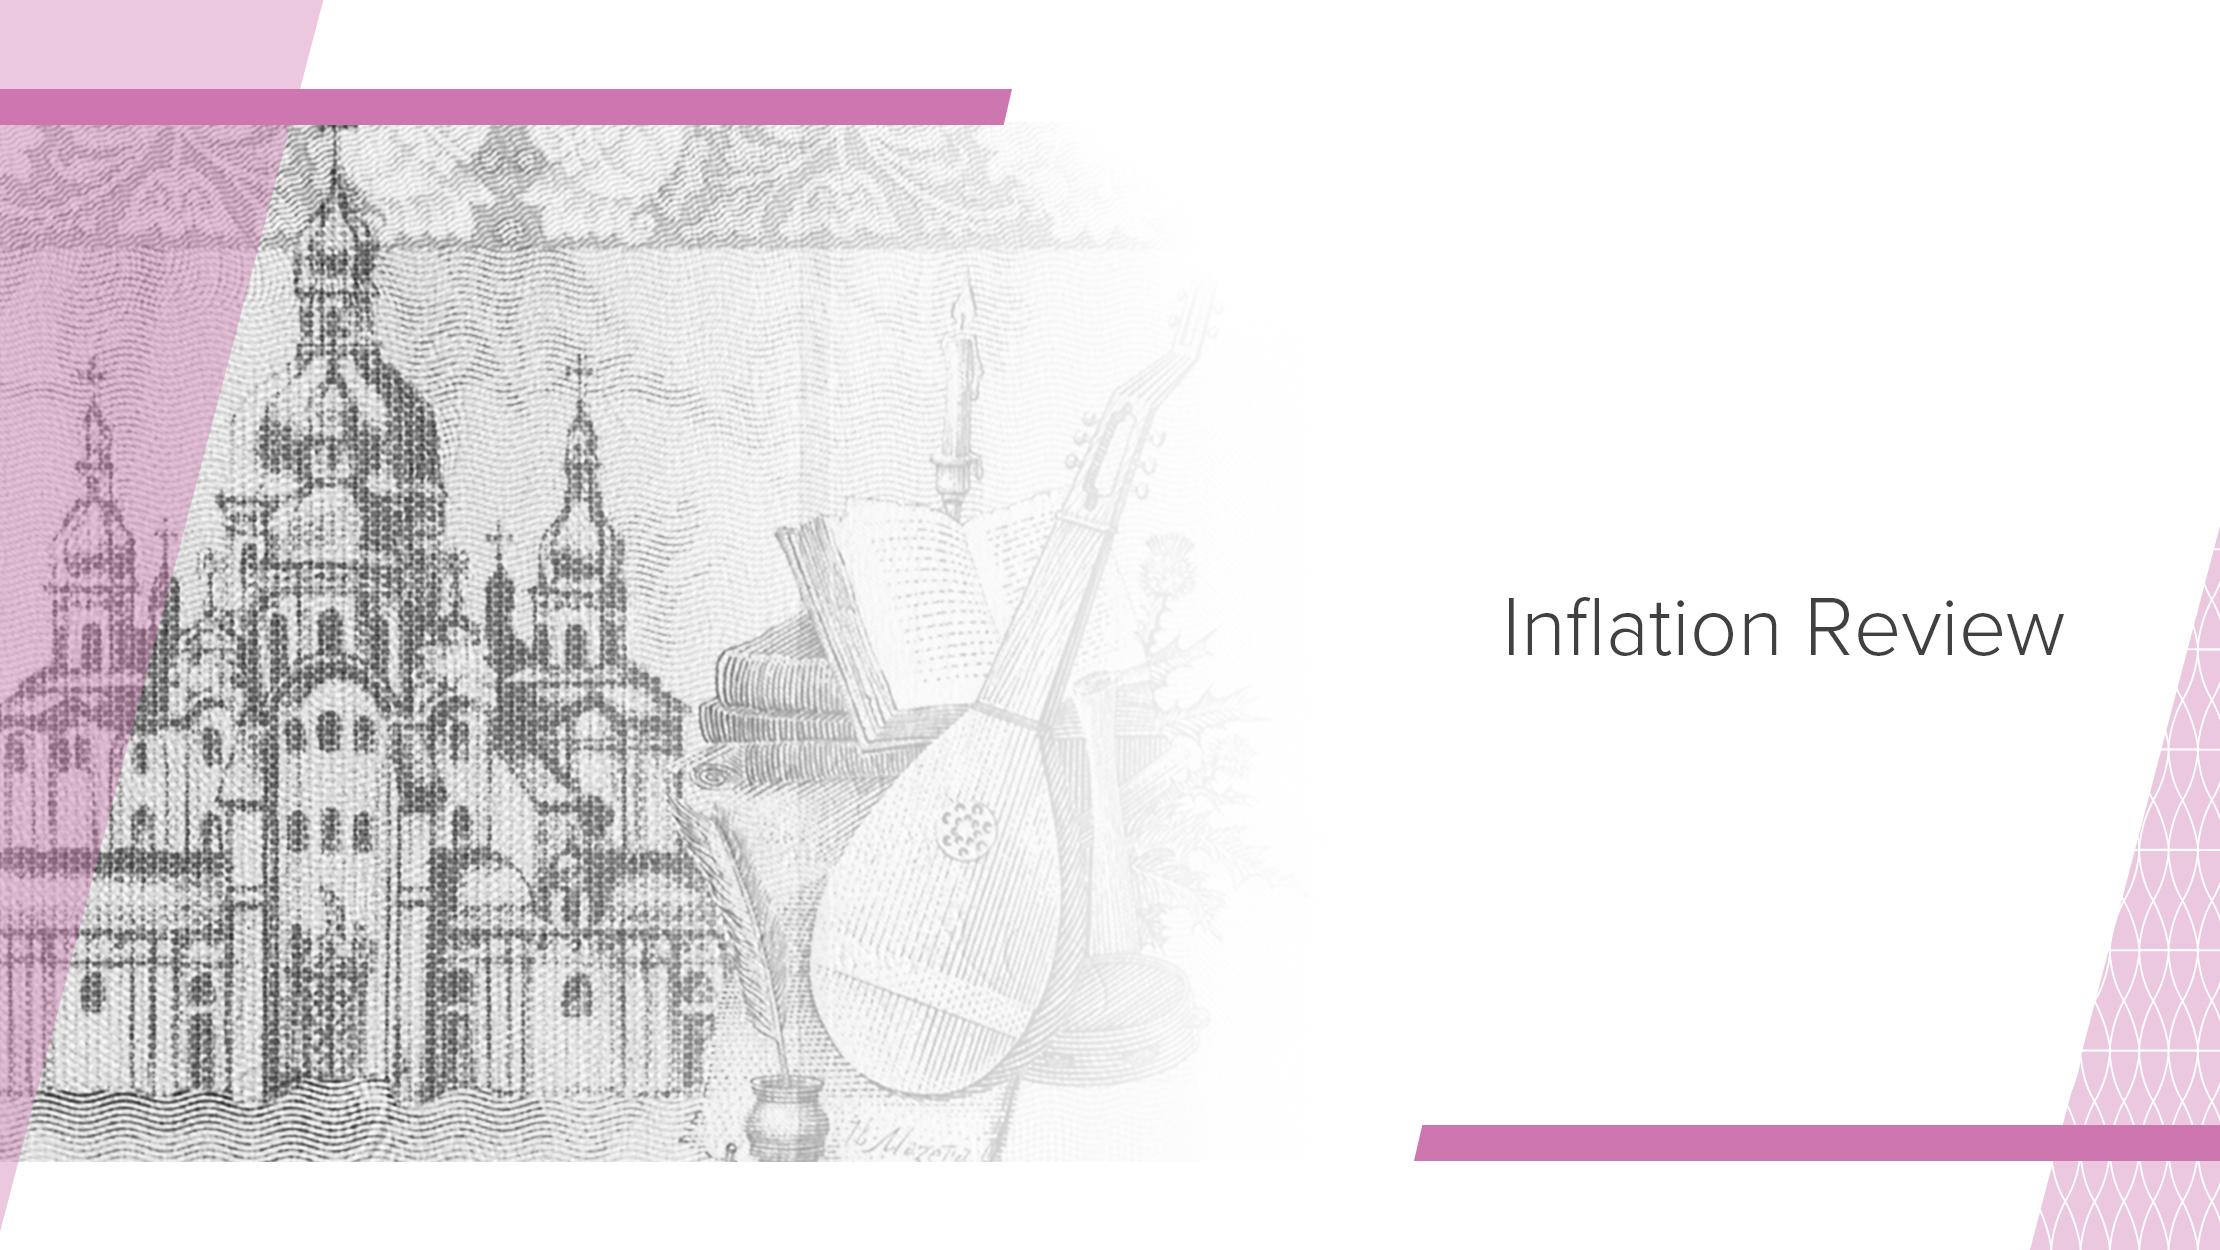 Inflation Review, April 2018